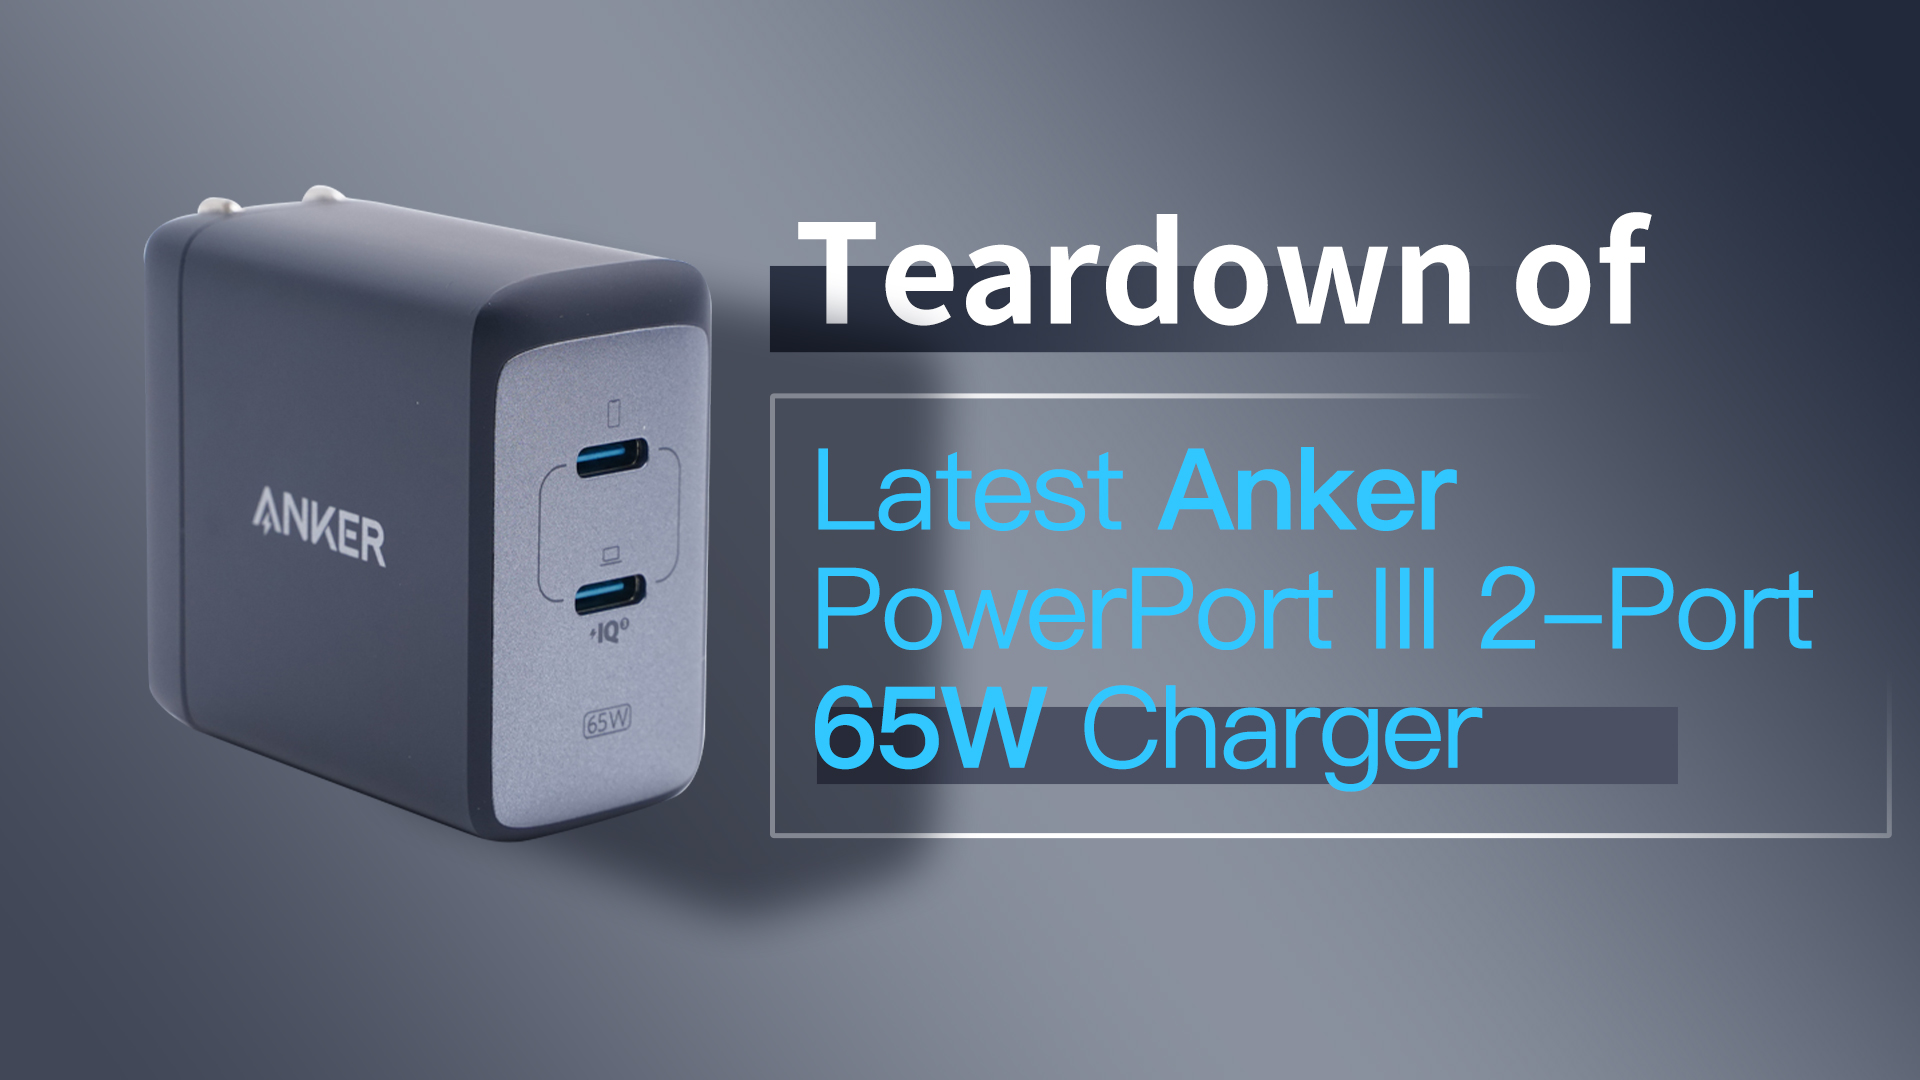 Teardown of Latest Anker PowerPort III 2-Port 65W Charger - Chargerlab